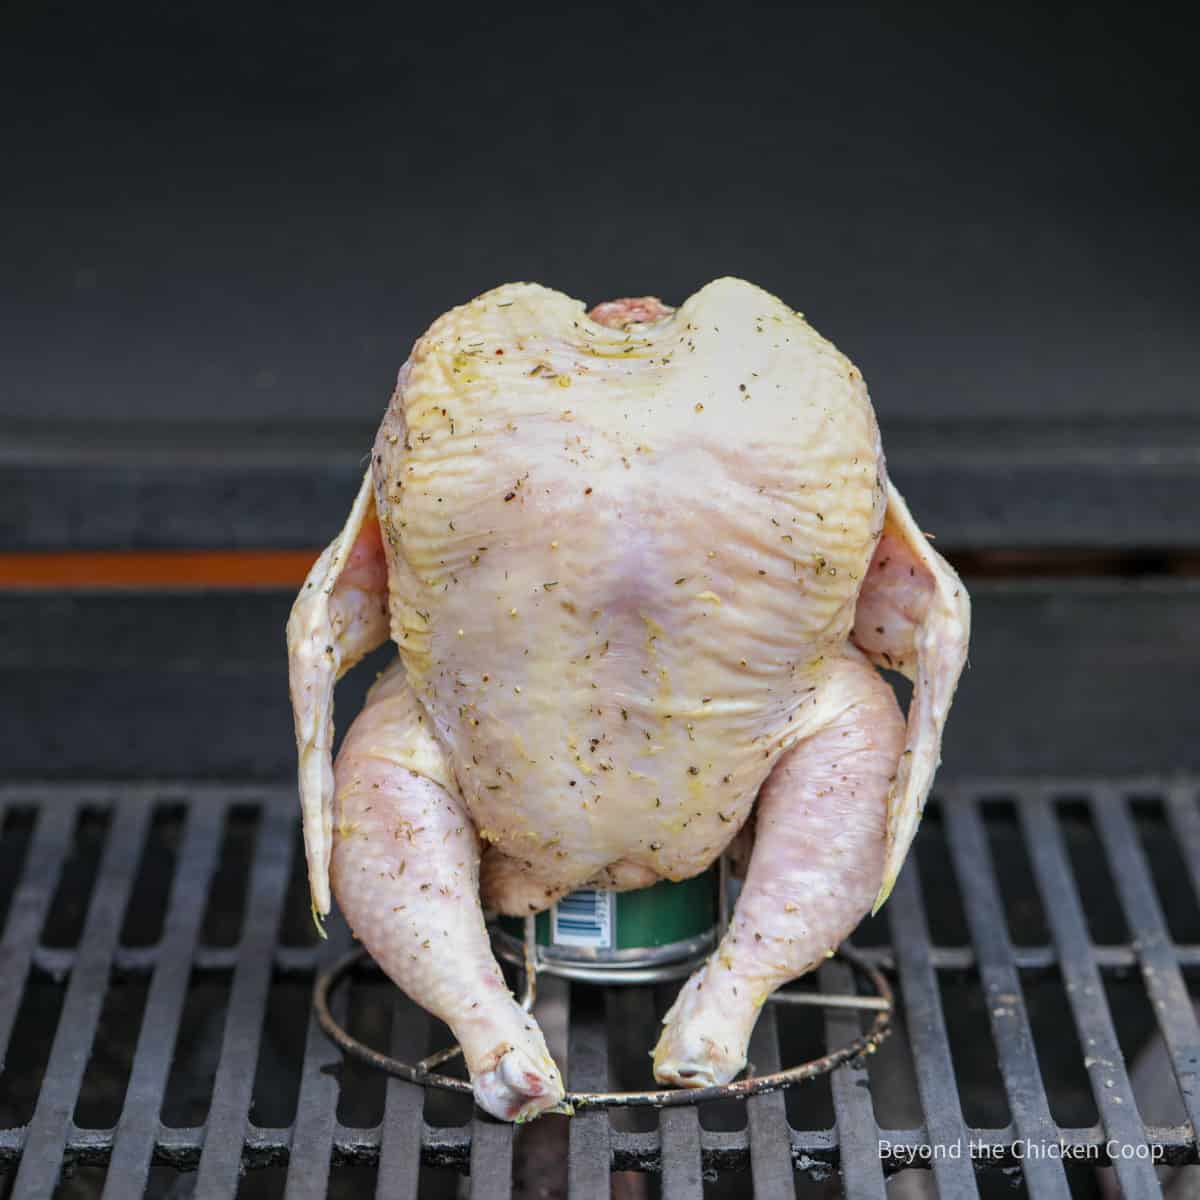 A whole chicken sitting on a beer can on a grill.